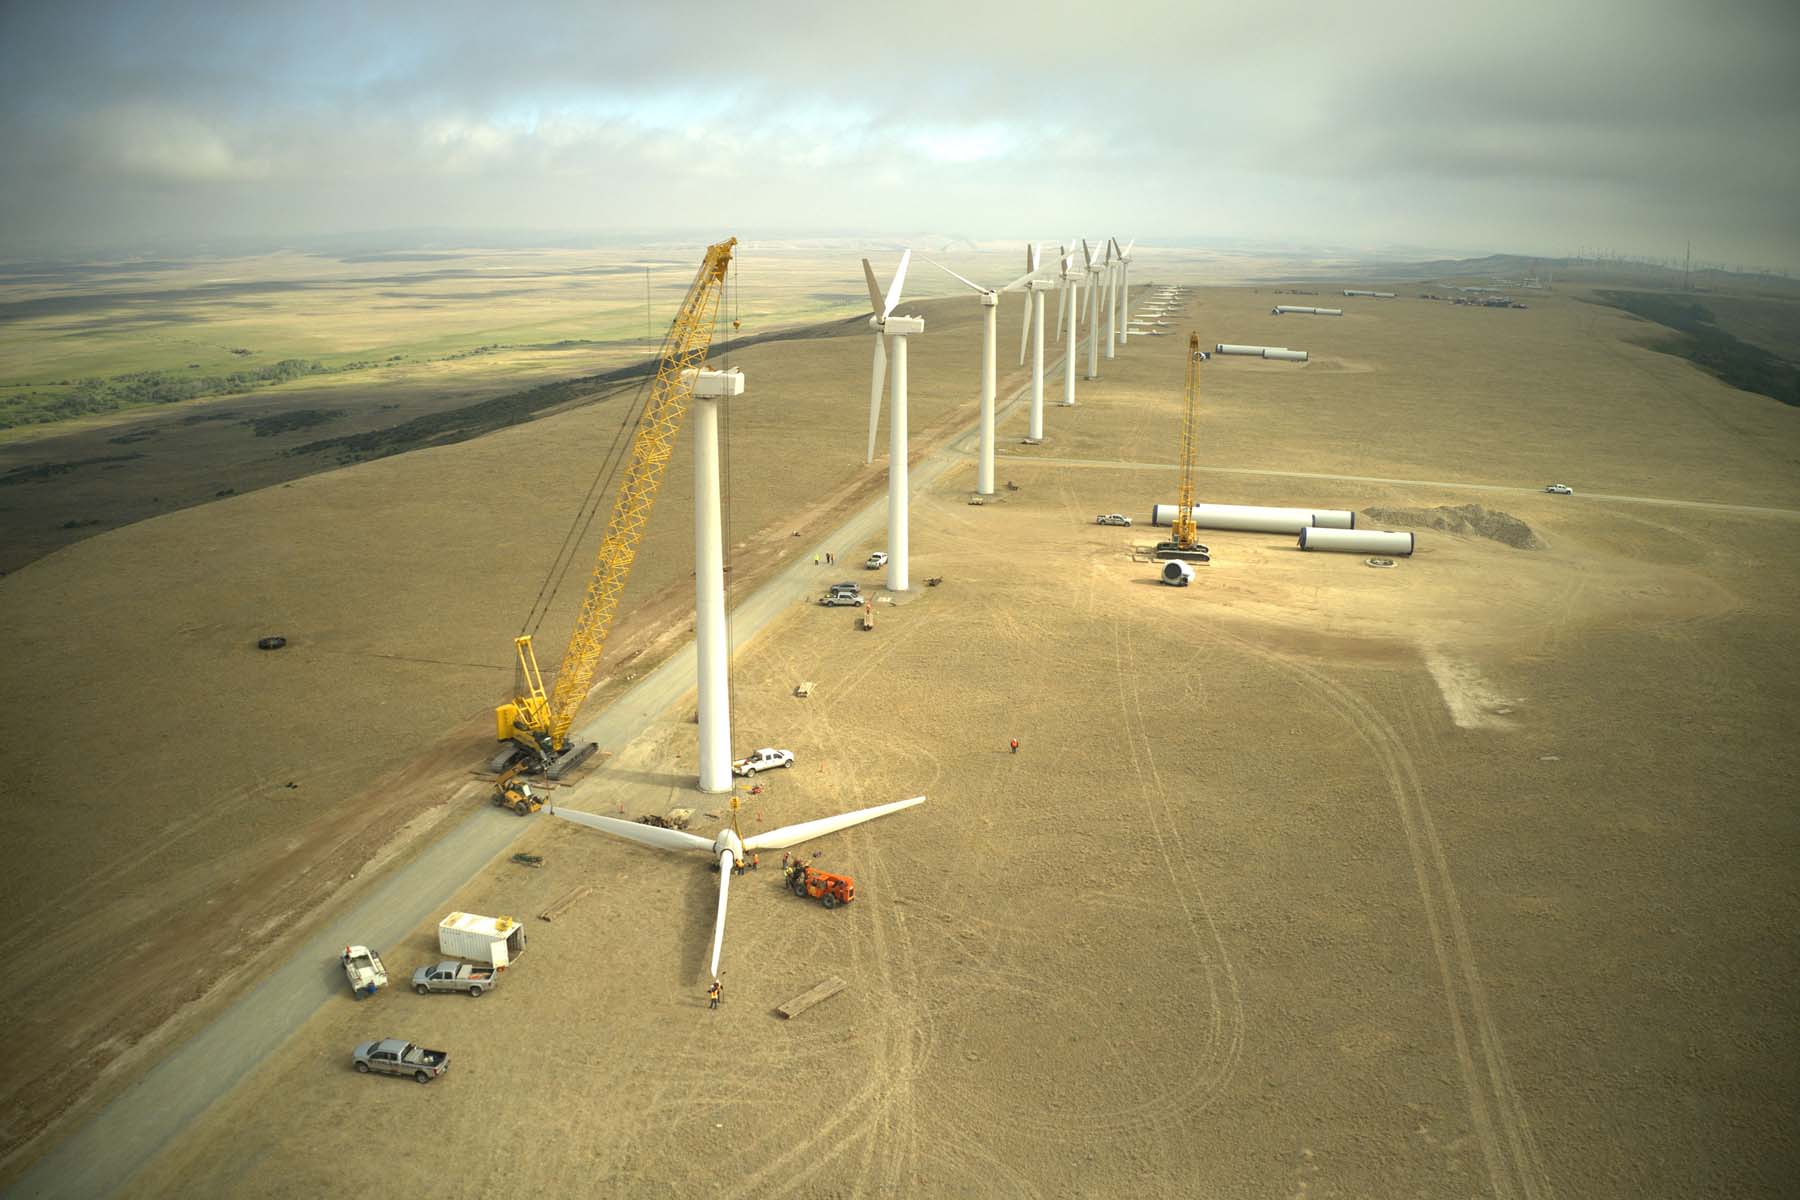 Field of wind turbines with one turbine being erected